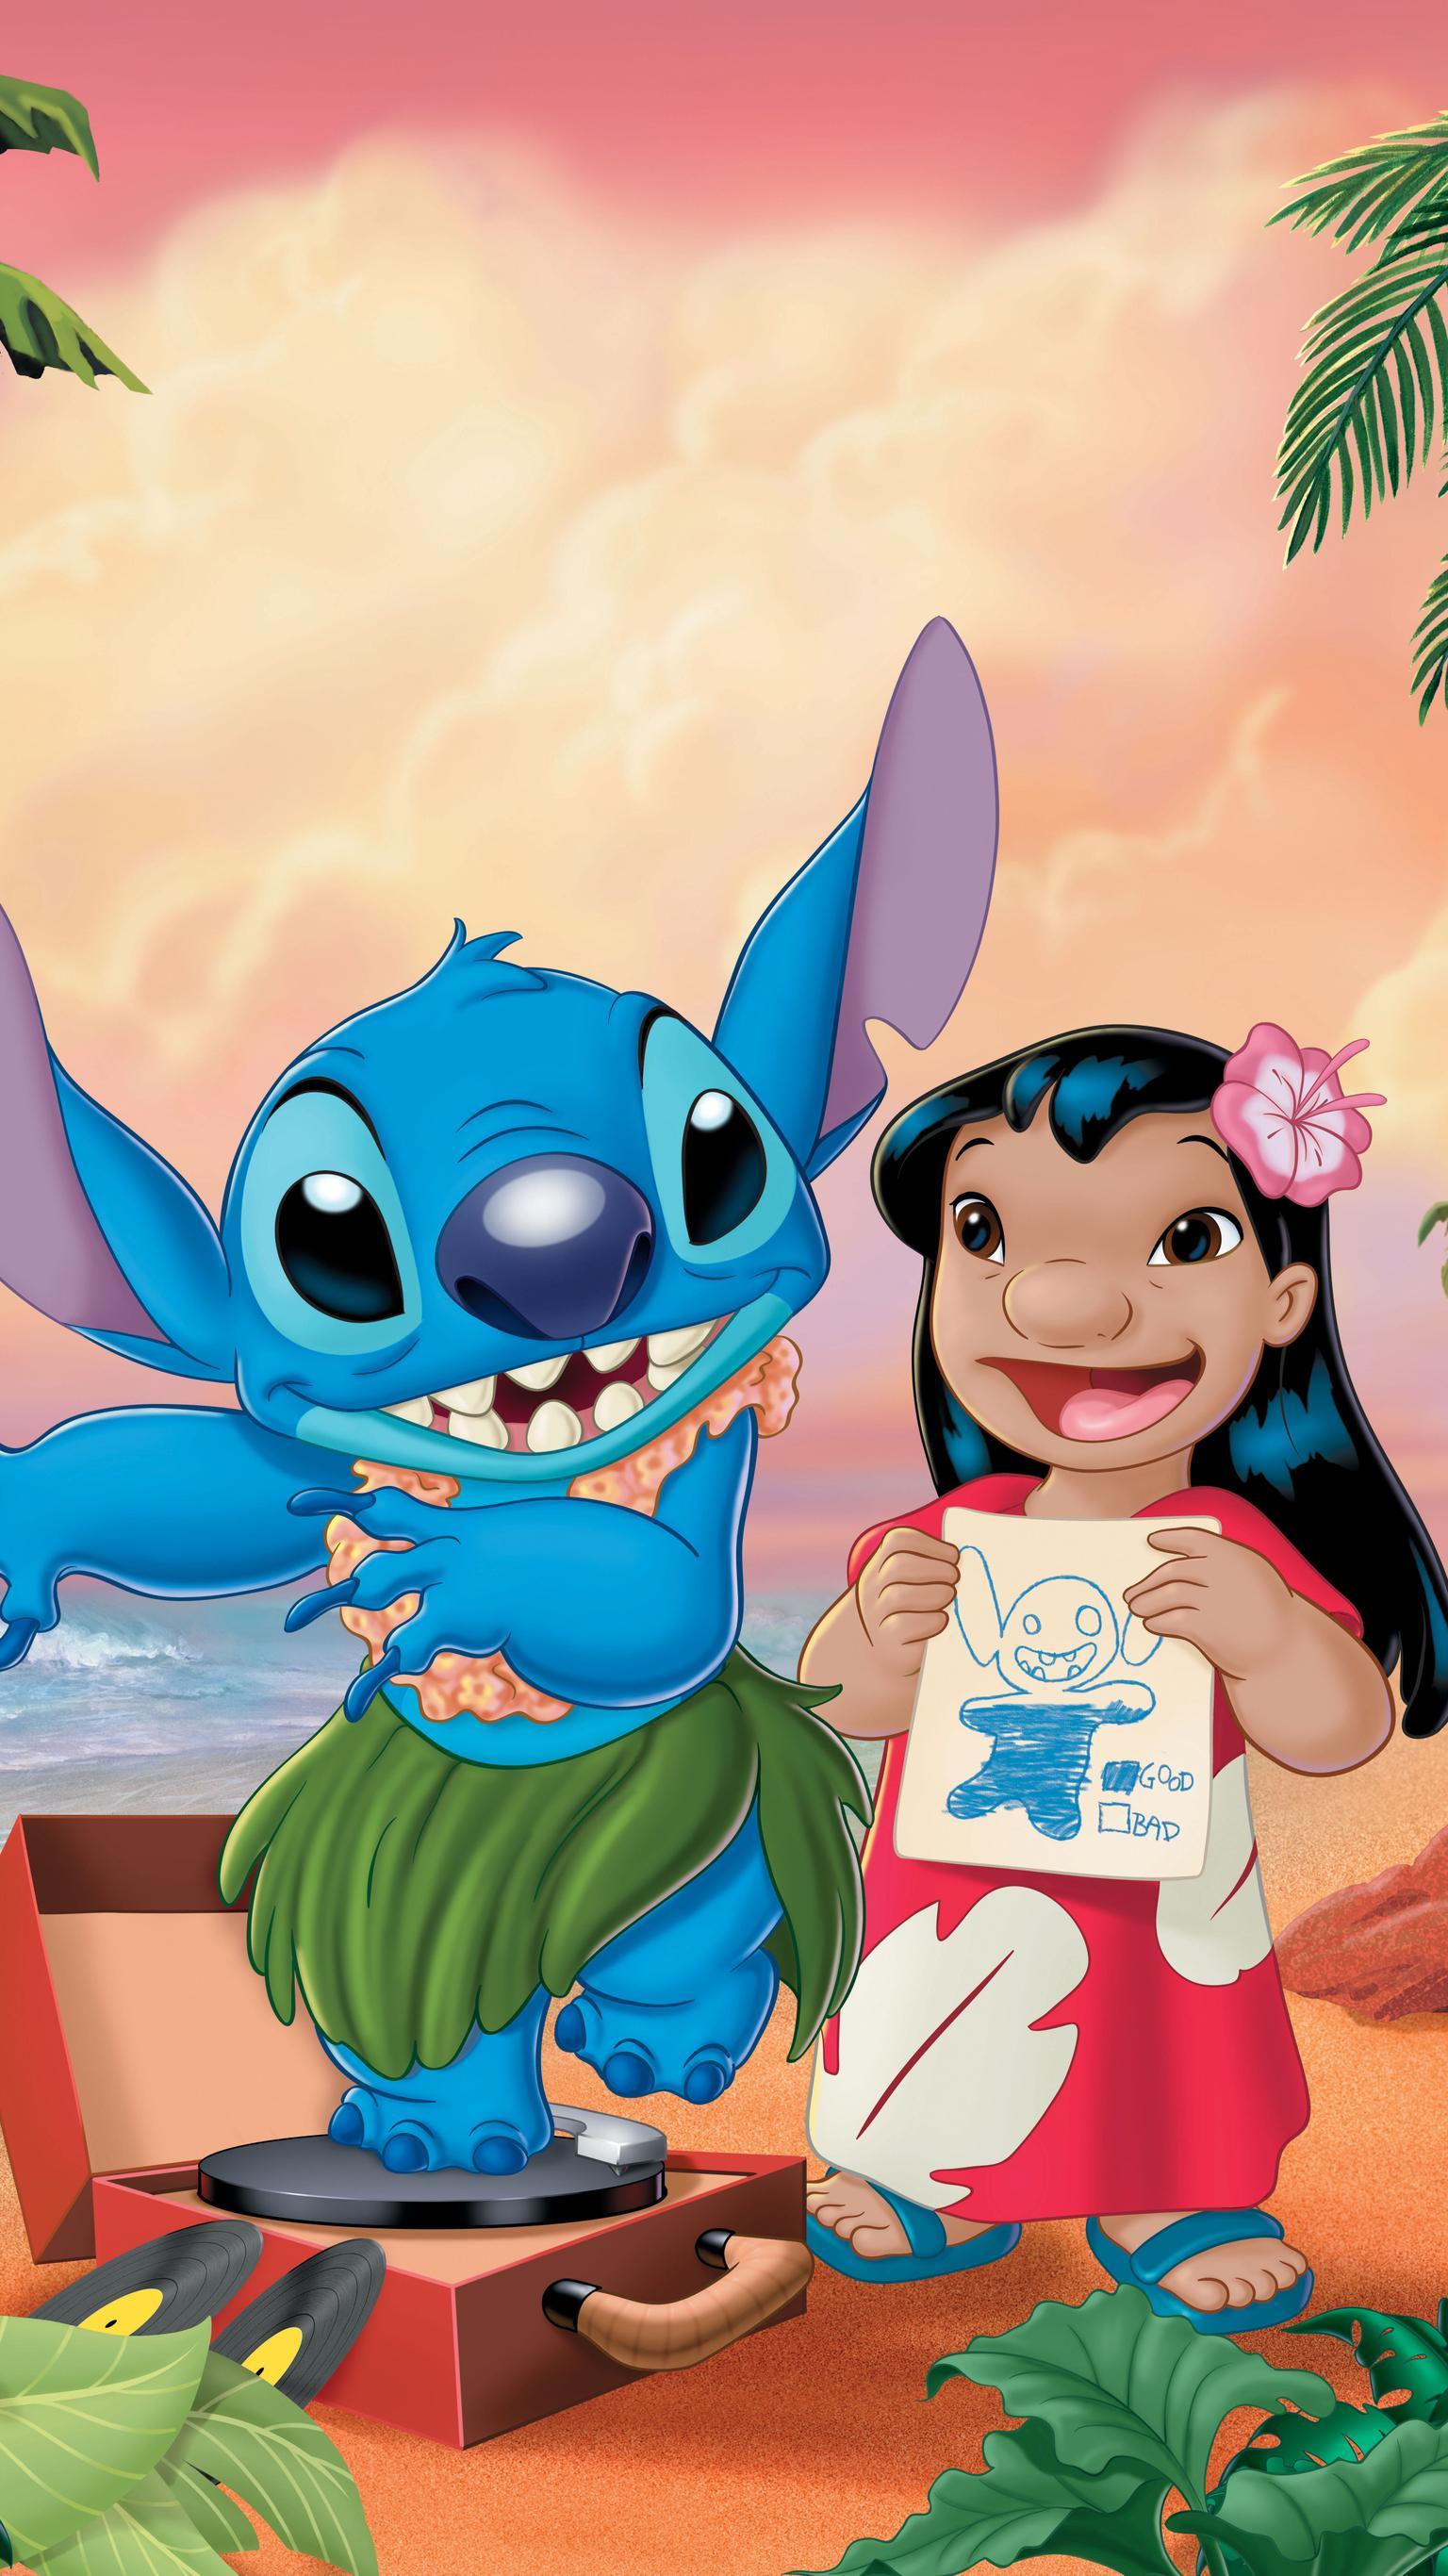 Lilo and Stitch Wallpapers - Top Free